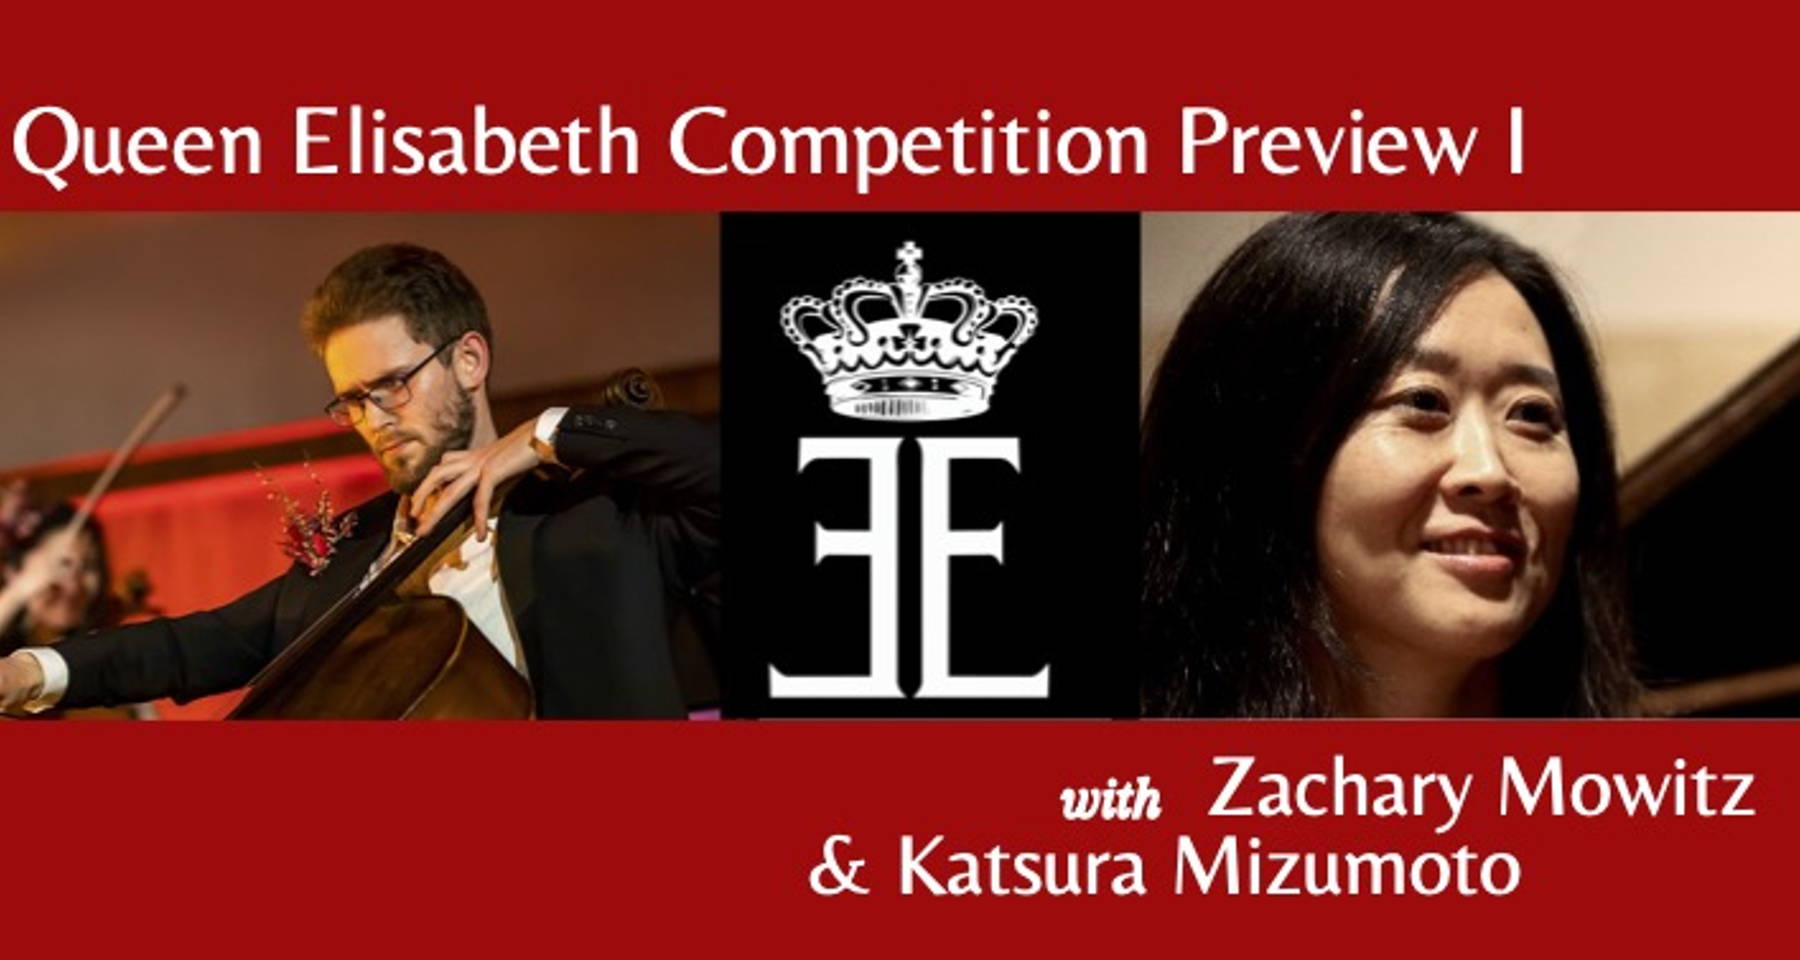 Queen Elisabeth Competition Preview I: Cellist Zachary Mowitz performs Schubert, Bartok, Janacek, and more